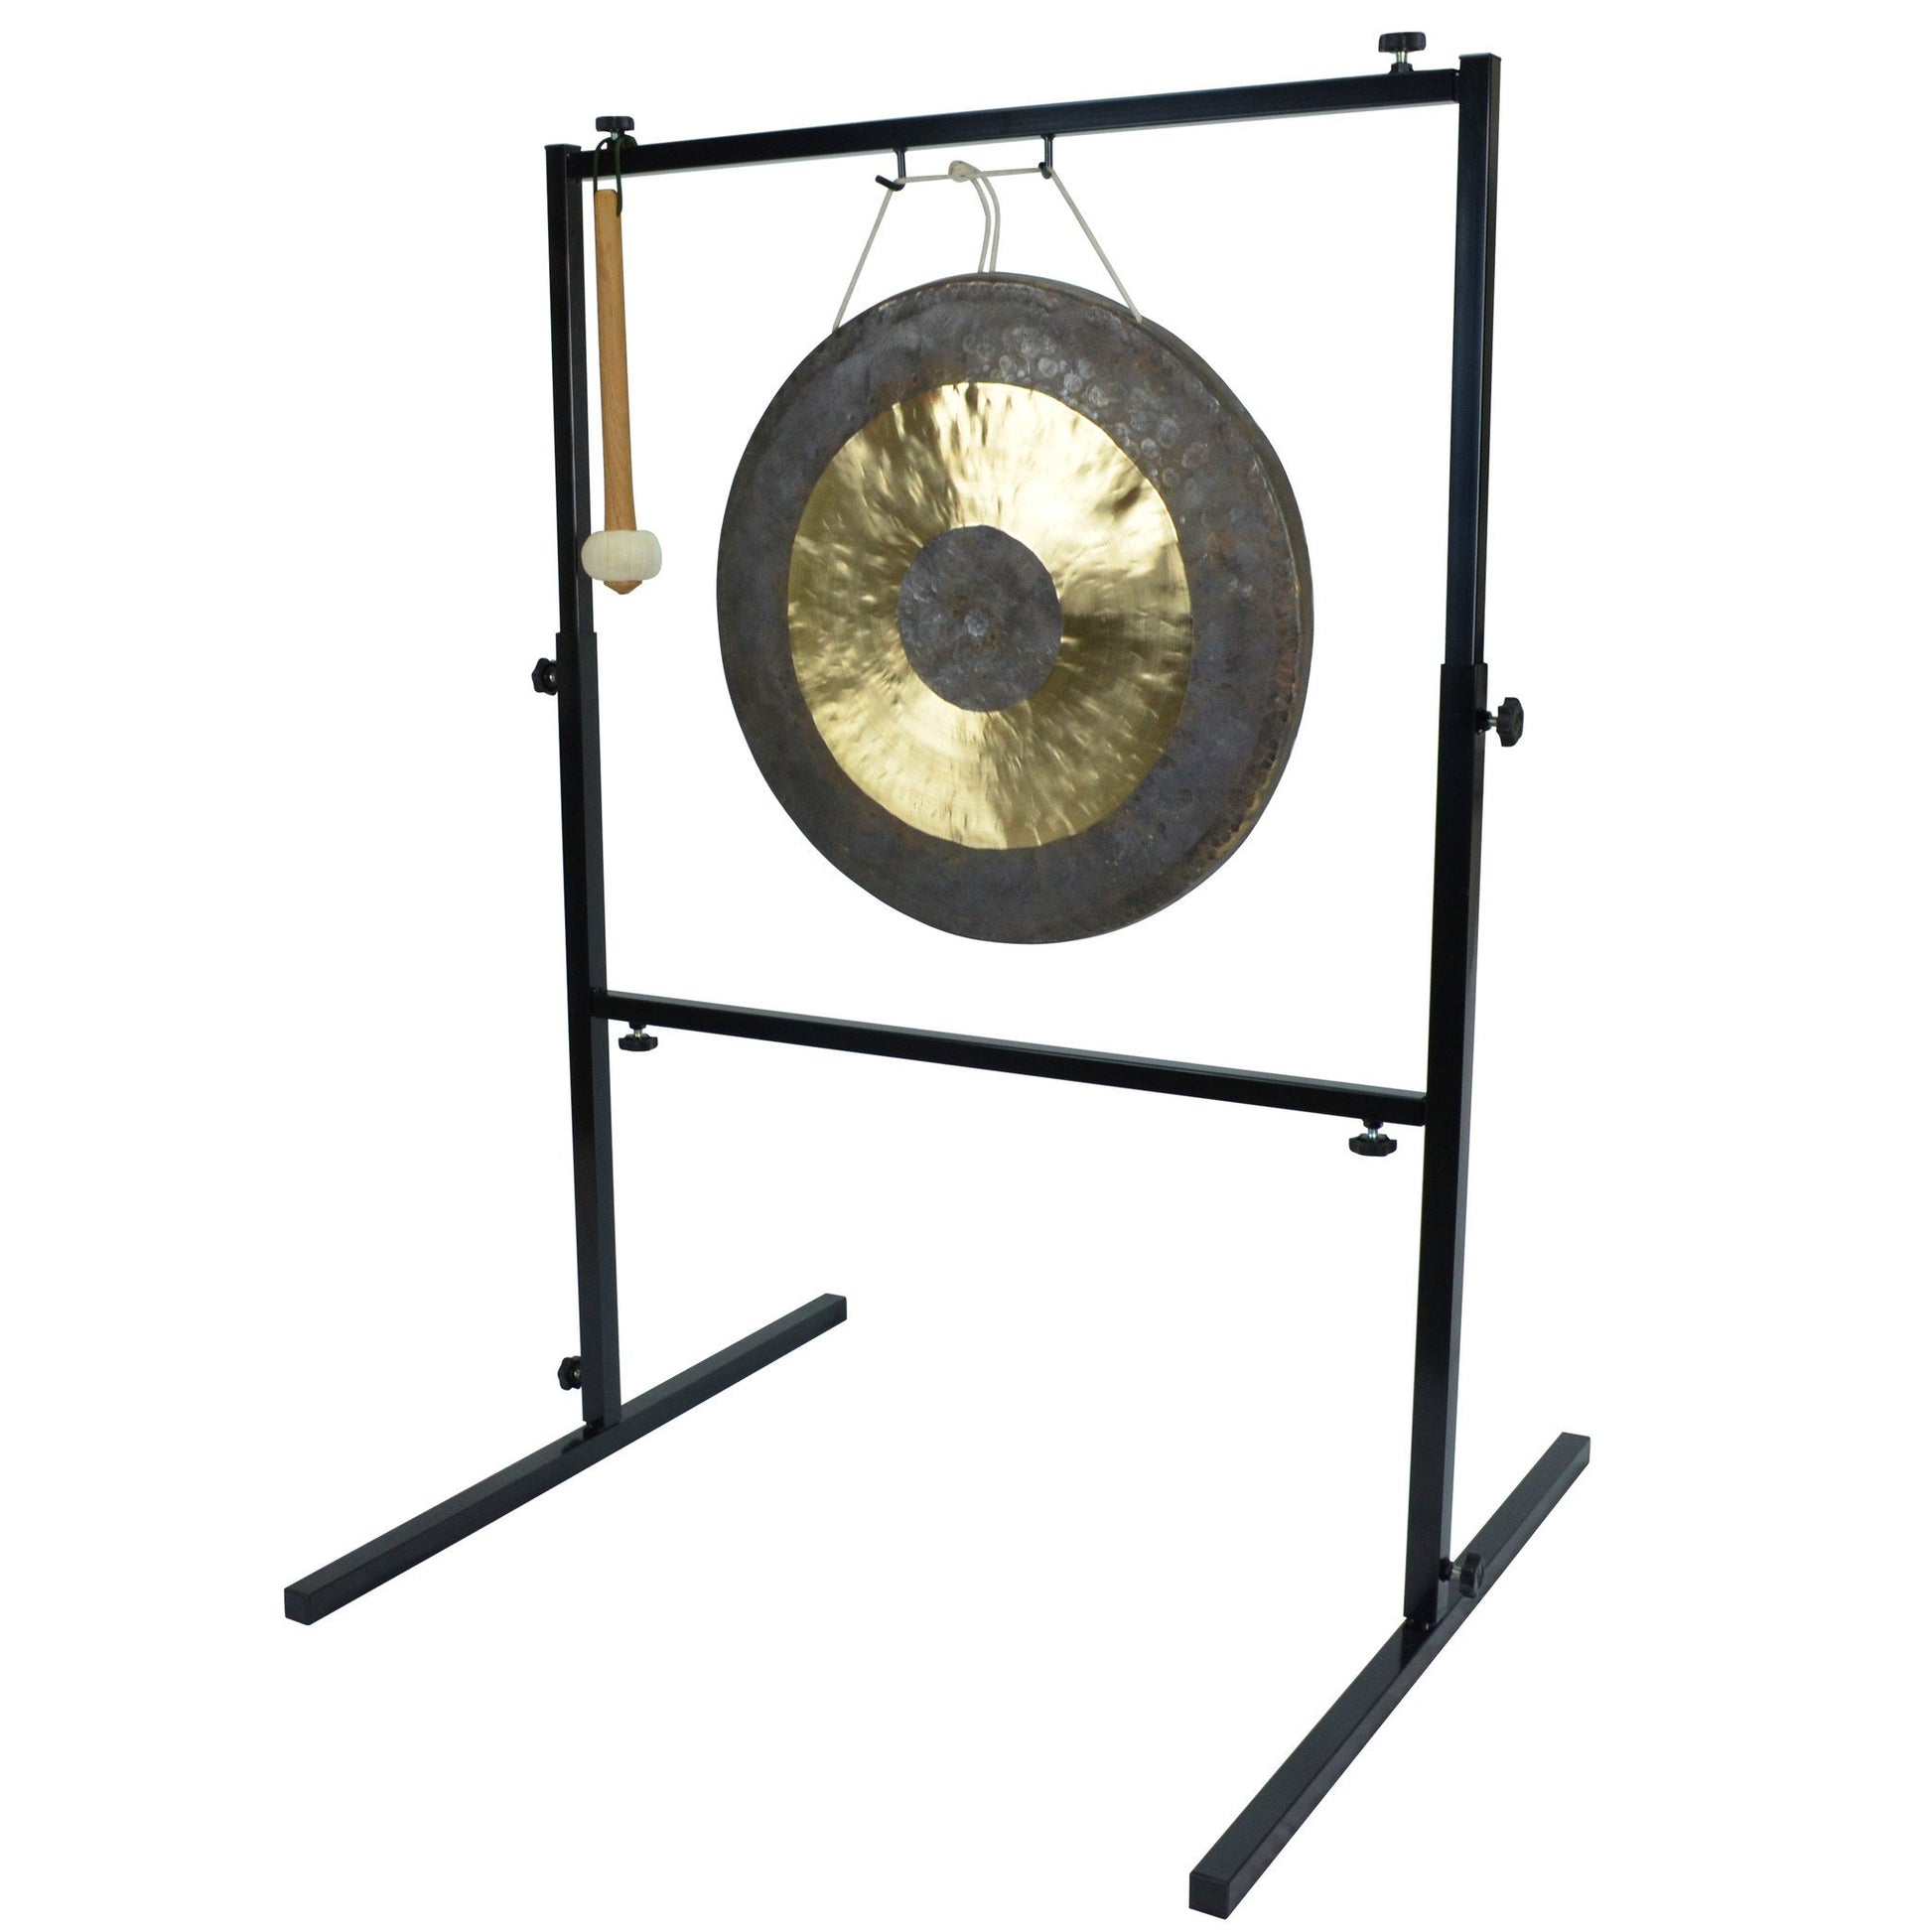 The Gong Shop Chinese Gongs with Stands 20" Chau Gong on Wuhan Gong Stand with Mallet